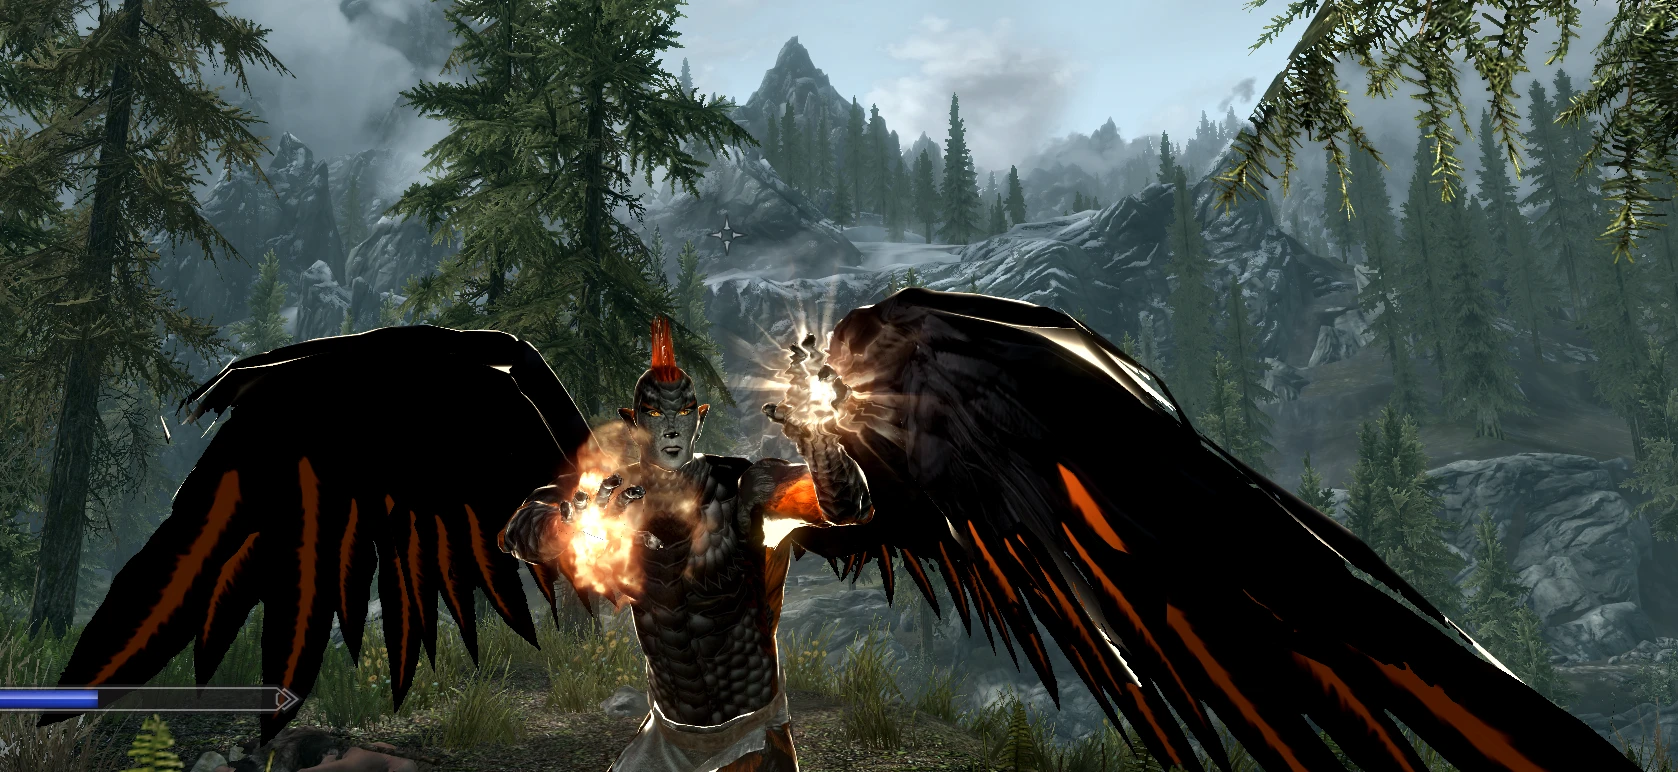 sse mods for low end pc skyrim